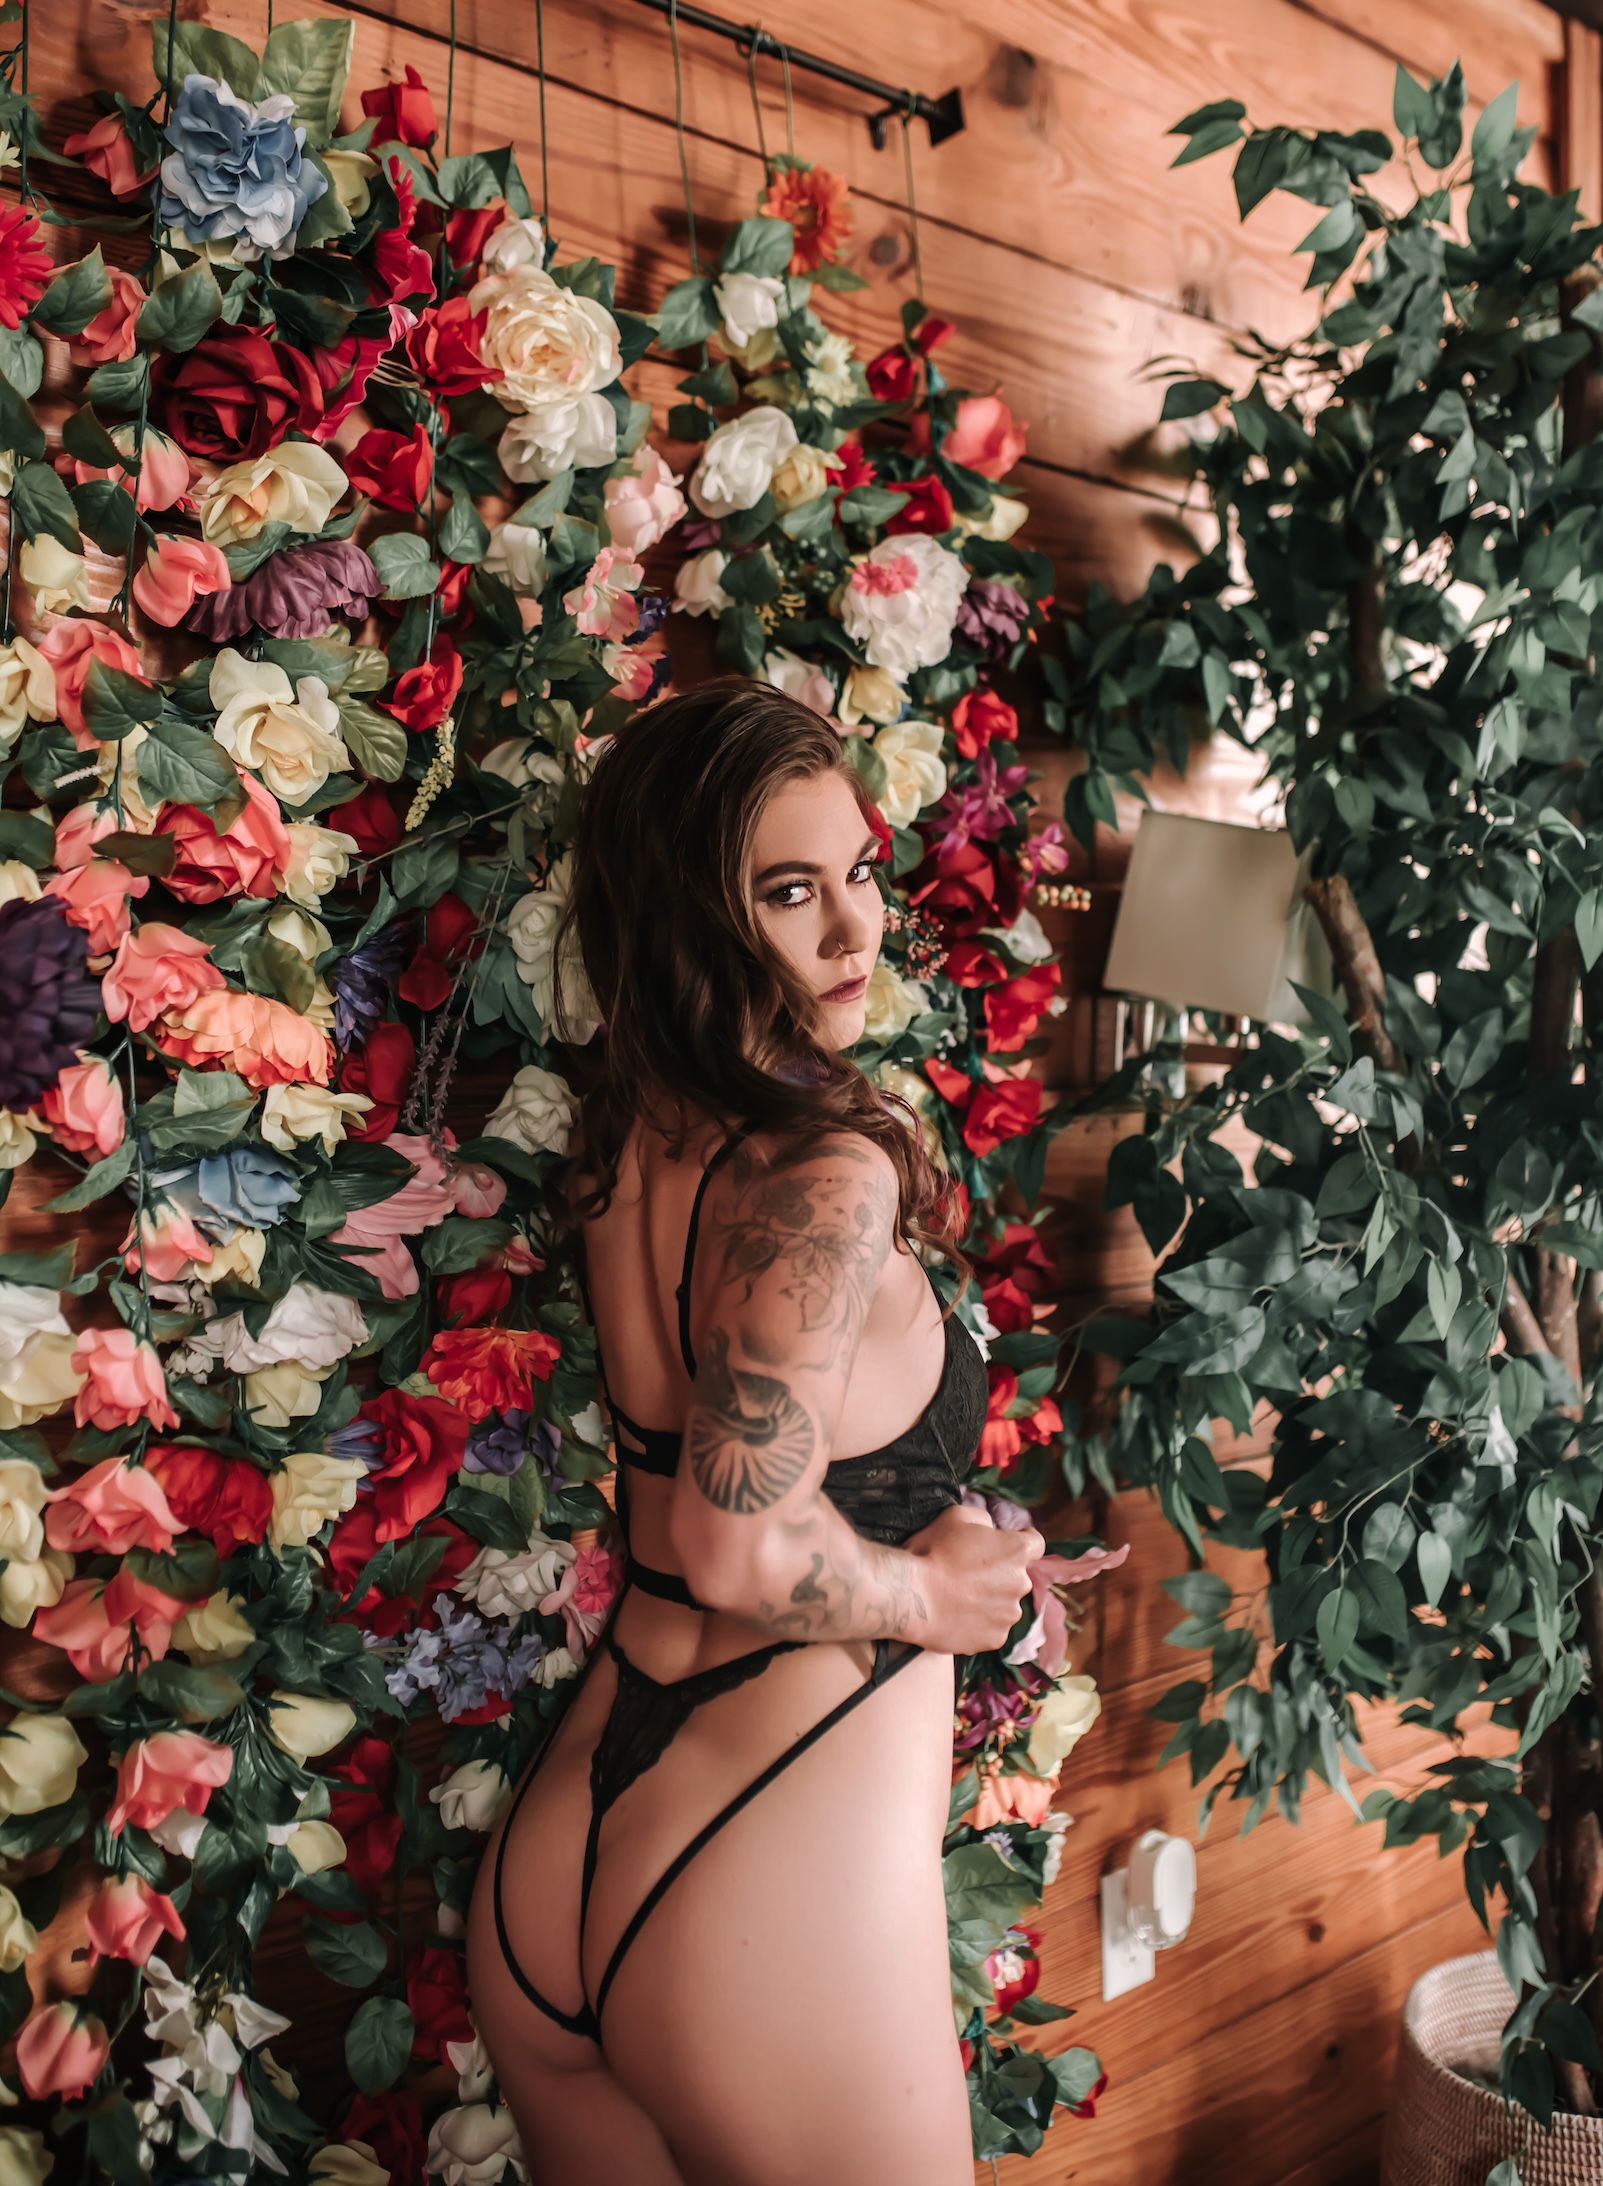 woman wearing black lingerie standing in front of floral wall